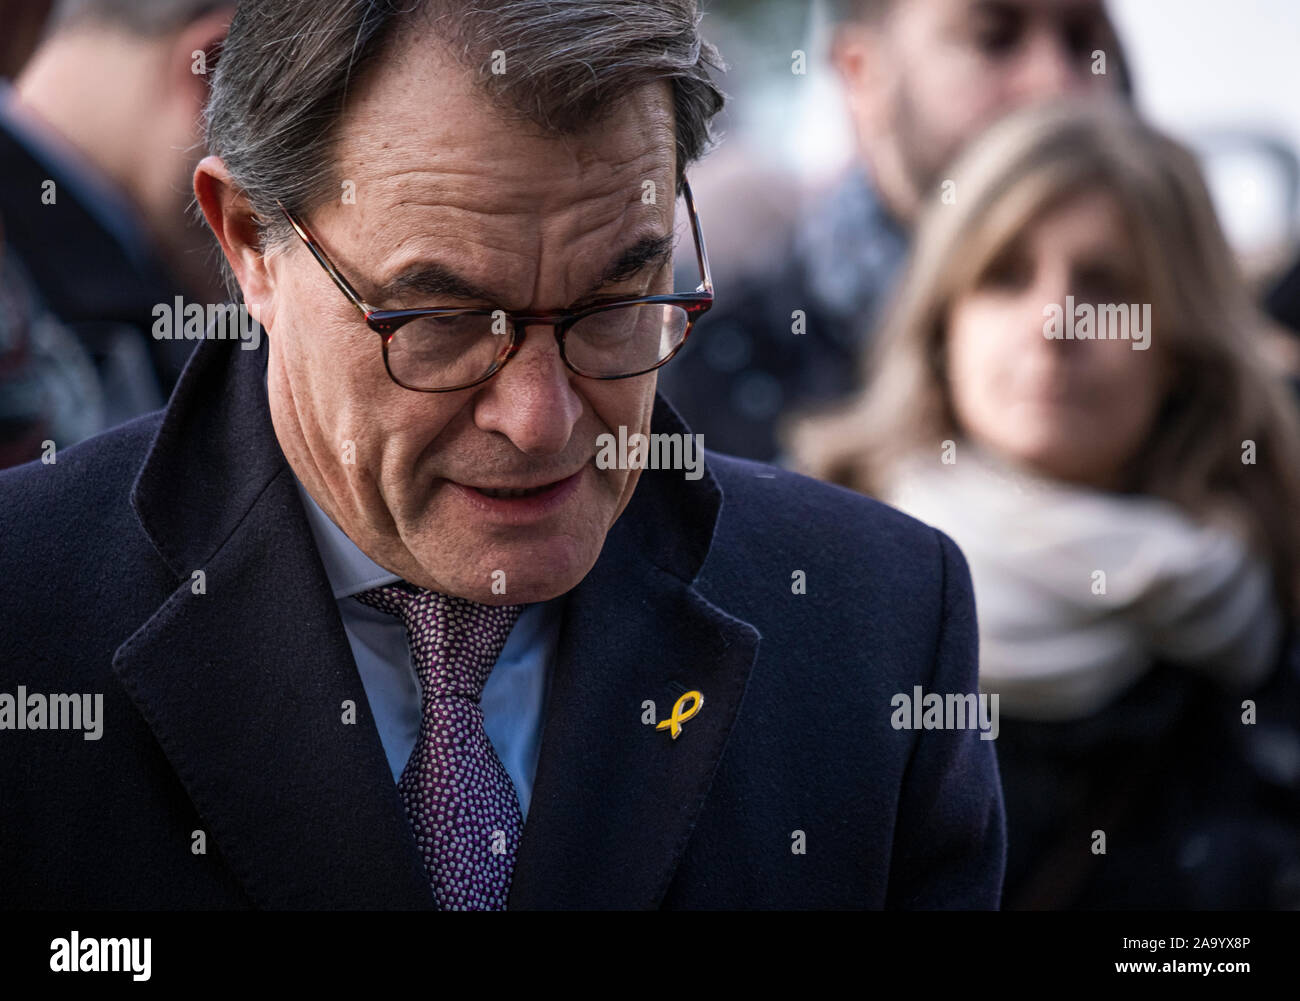 The former president of the Generalidad of Catalonia Artur Mas is seen during the trial of President Quim Torra.The president of the Generalitat of Catalonia Quim Torra has testified today before the Superior Court of Justice of Catalonia accused of disobeying the order to withdraw symbols for the independence of Catalonia from public buildings during the 28A election campaign. Stock Photo